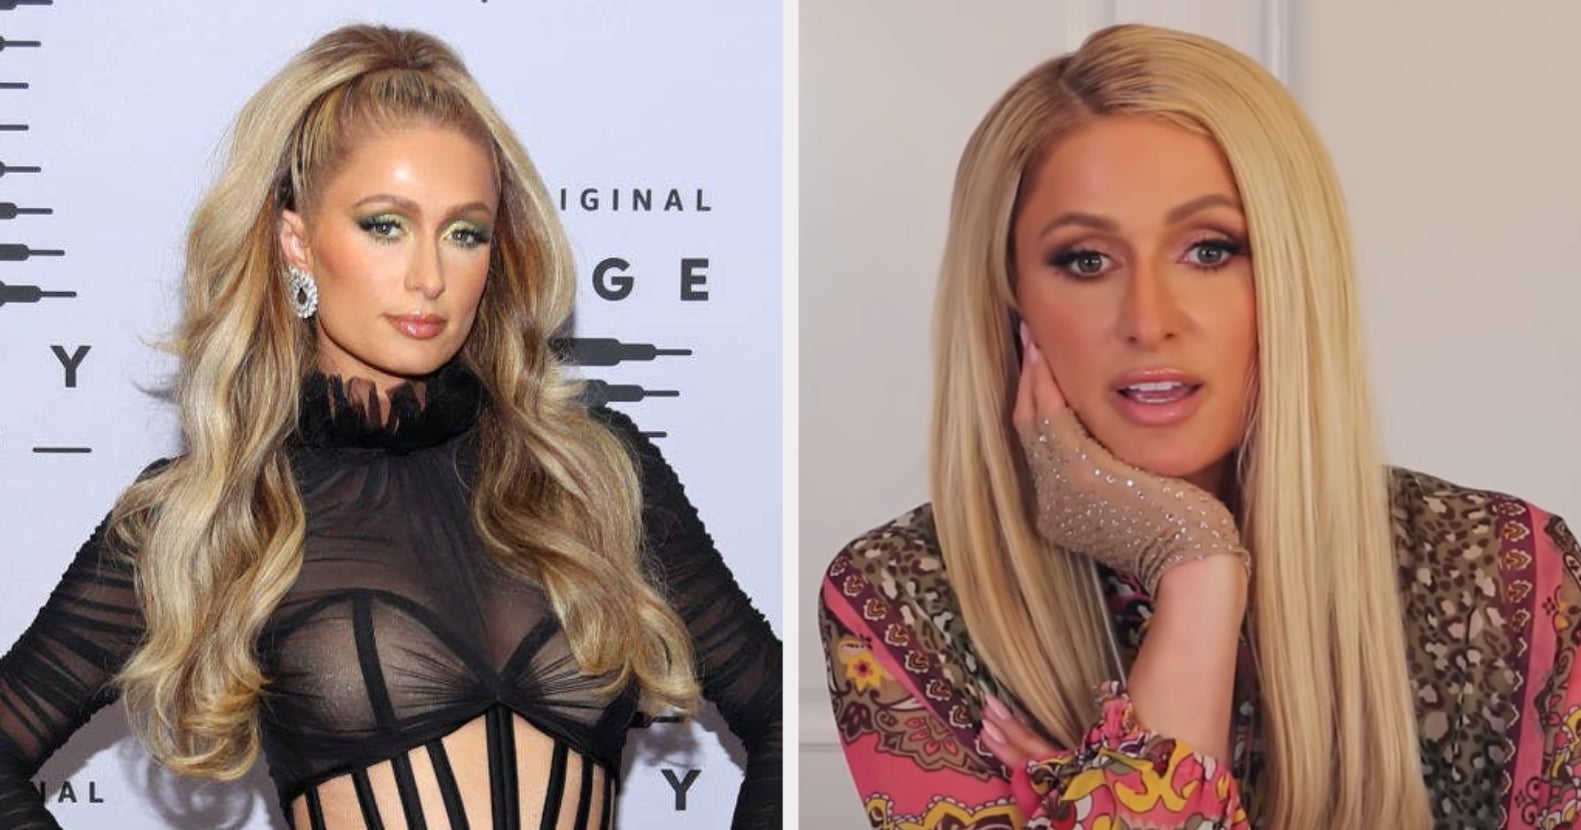 Paris Hilton Opened Up About The "Really Scary" Moment She Got Home To Find An Intruder In Her Kitchen